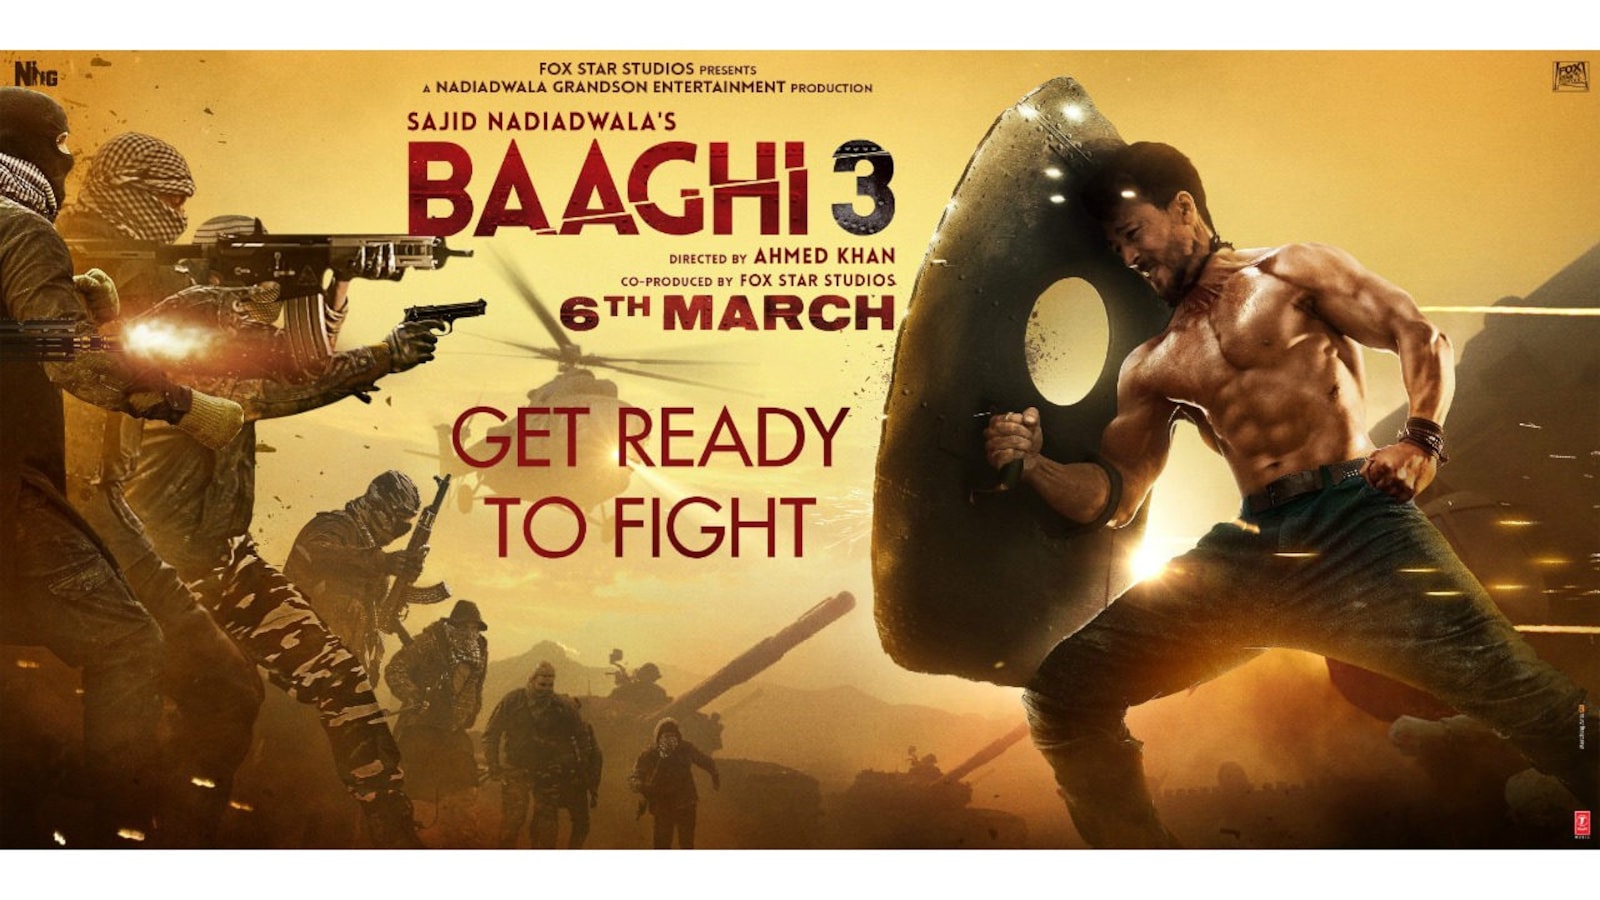 Baaghi 3' another success for Sajid Nadiadwala, Tiger Shroff and Ahmed  Khan; stage set for 'Baaghi 4'